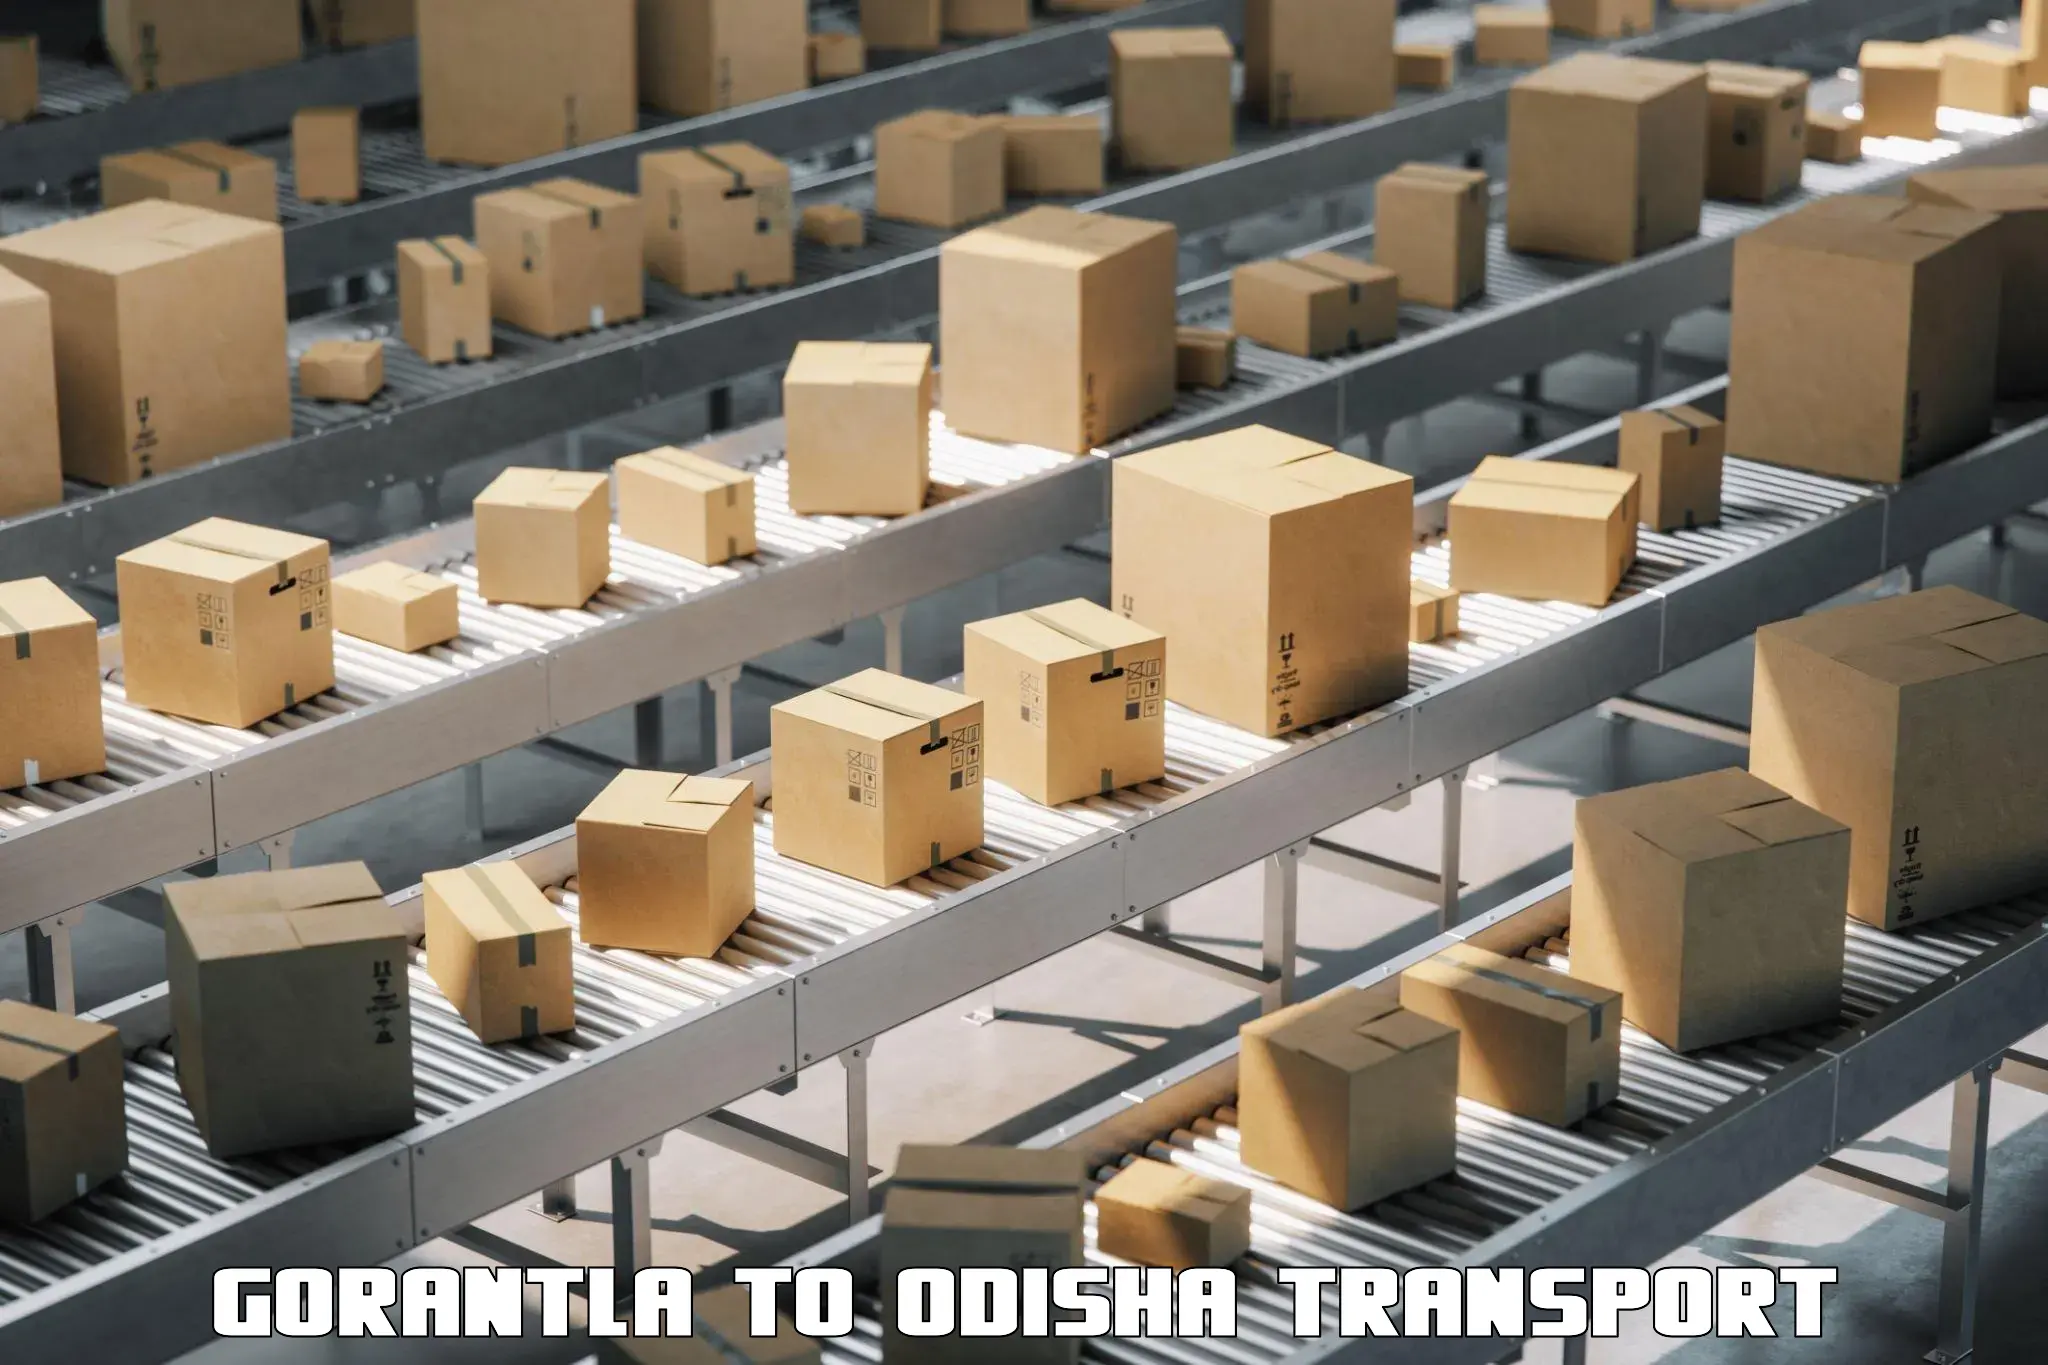 Container transport service Gorantla to Asika